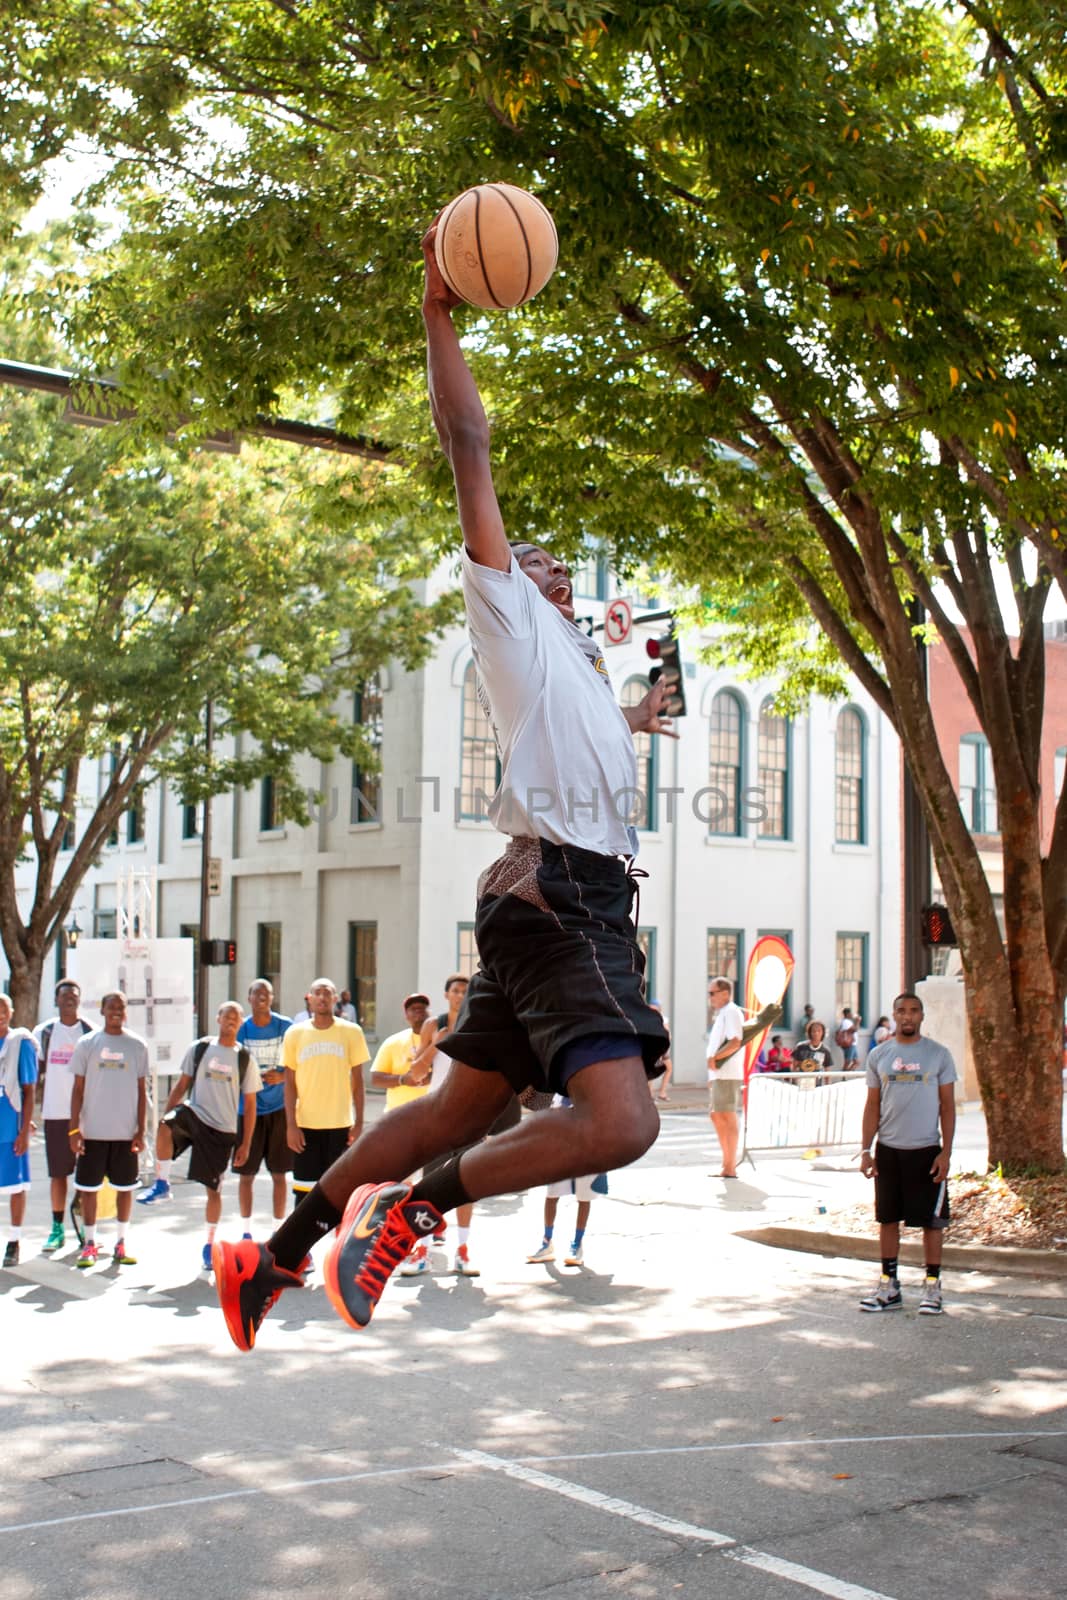 Young Man Leaps To Dunk Basketball During Outdoor Street Tournament by BluIz60